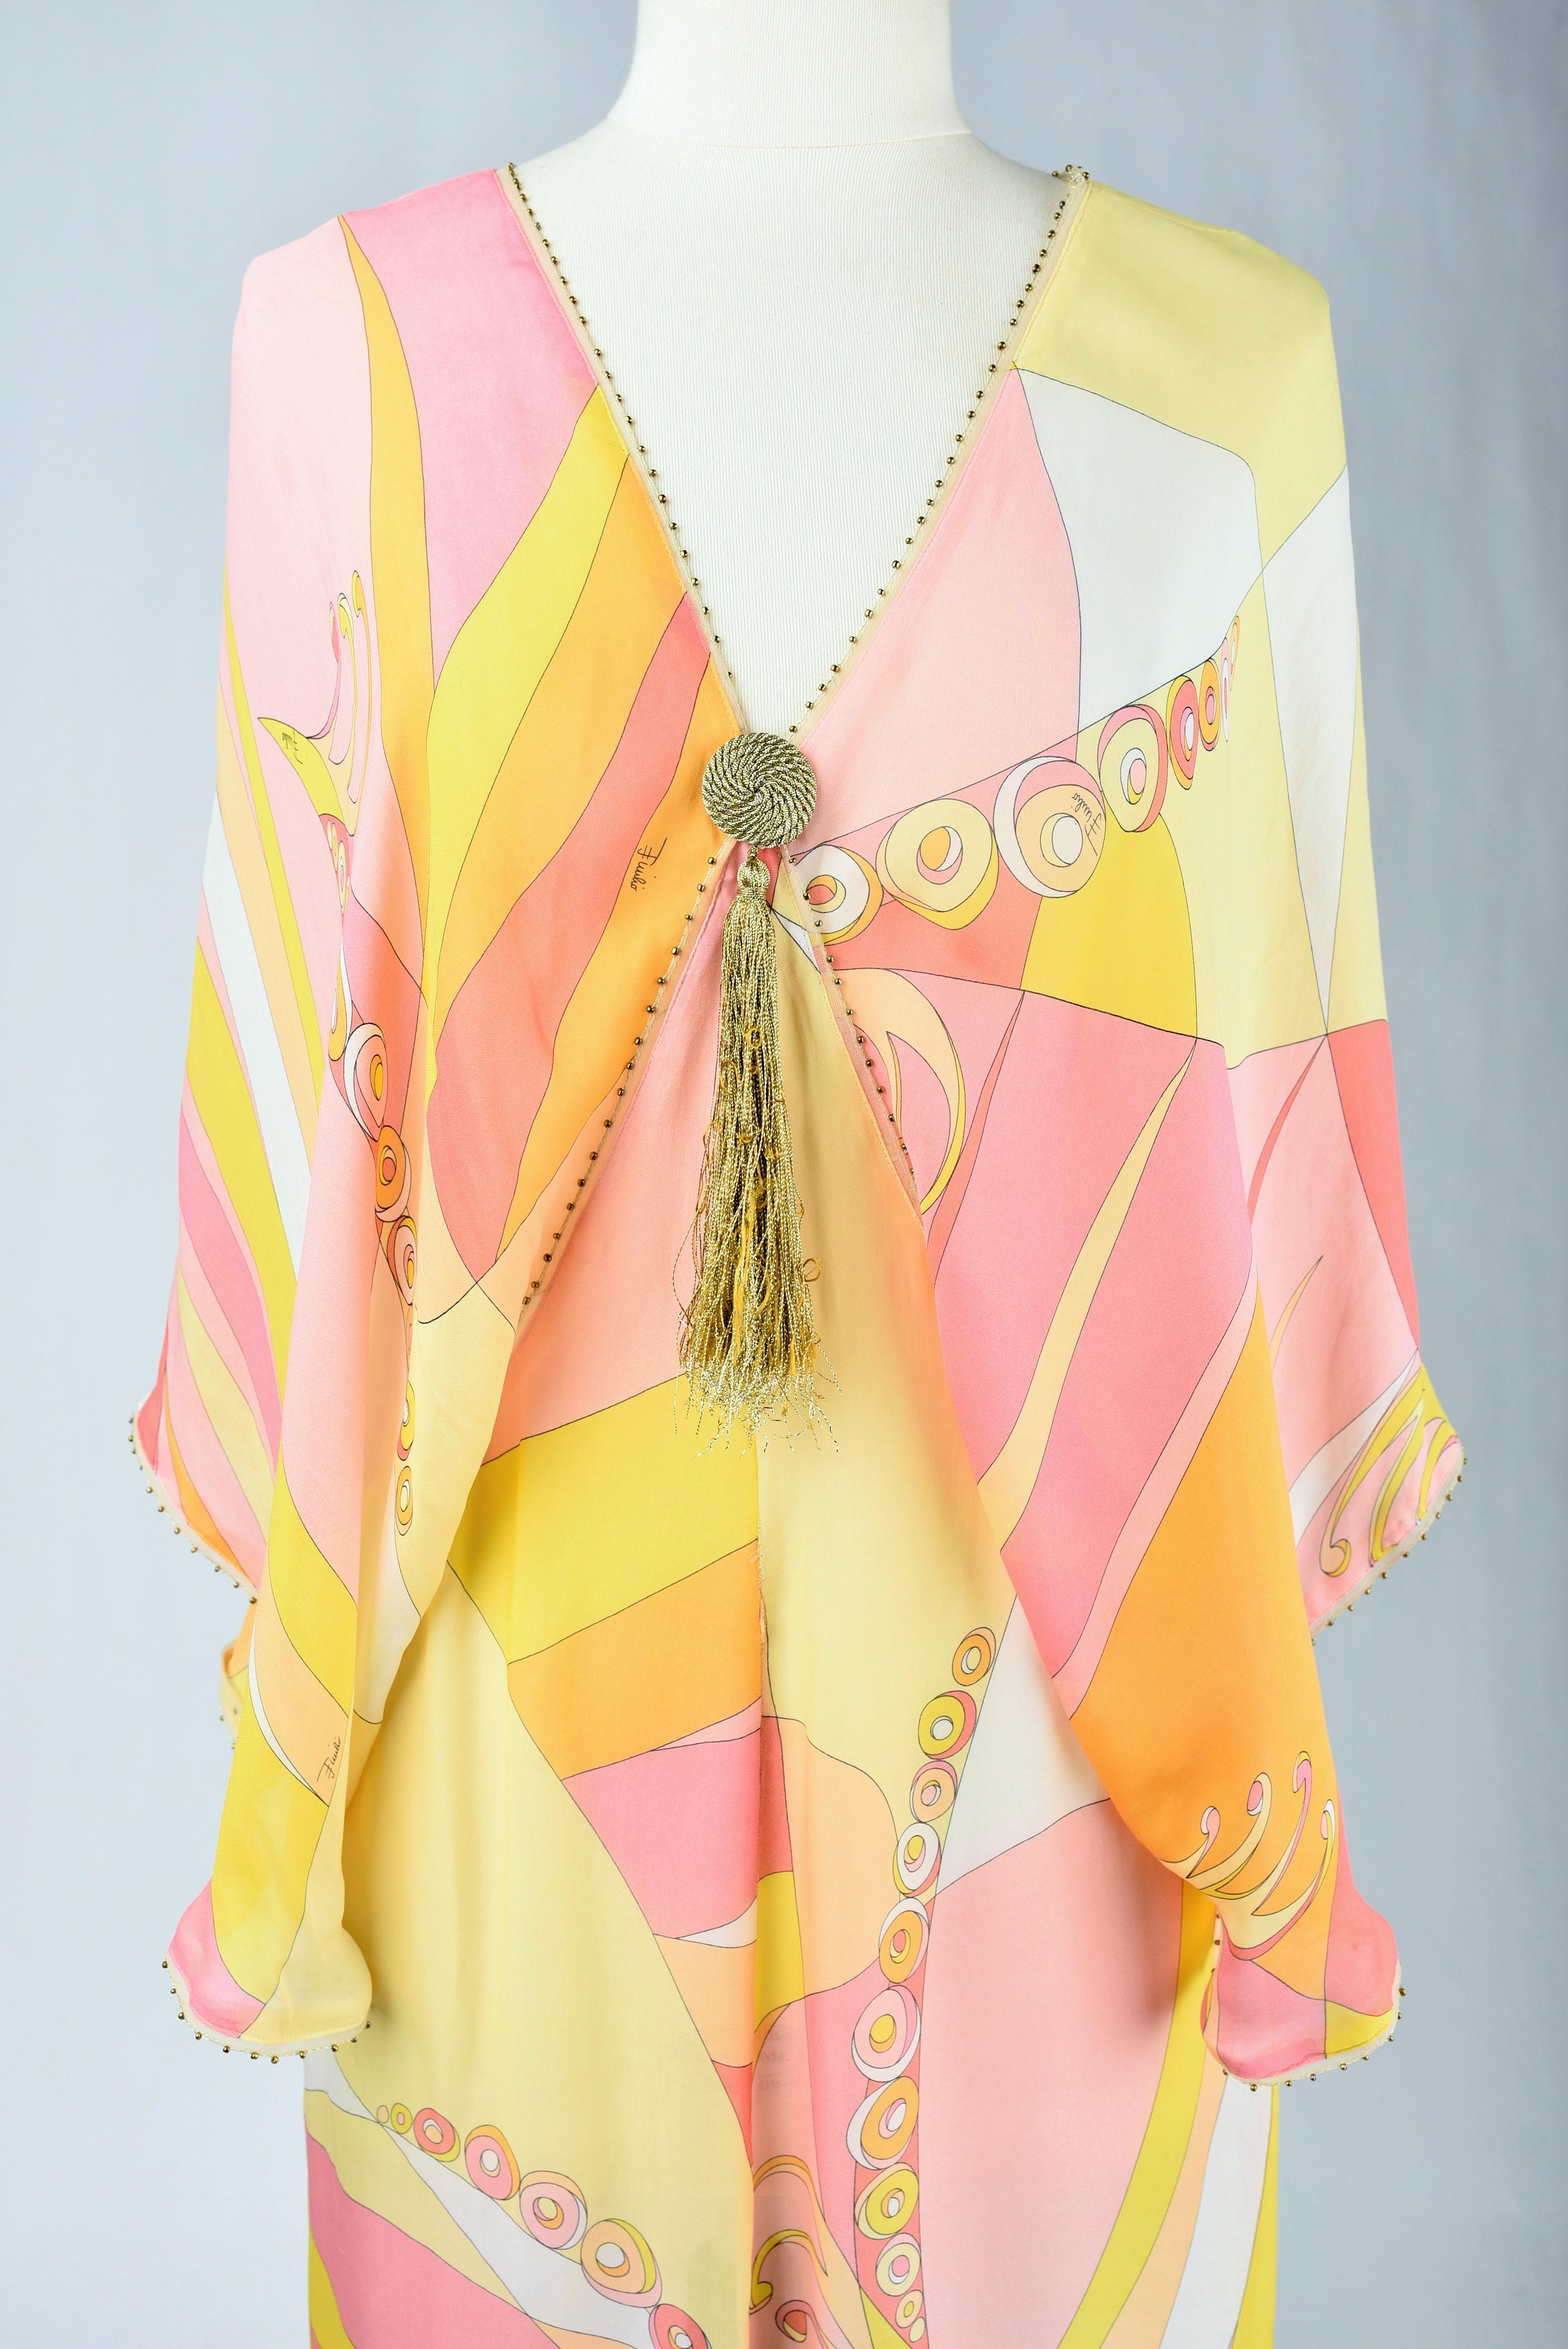 Circa 2000

Italy

Beautiful summer dress for evening or indoor in printed chiffon by Emilio Pucci. Djellaba style long dress with plunging V-neckline, large kimono sleeves, slit on the sides. Printed silk chiffon signed Emilio, with large pink,